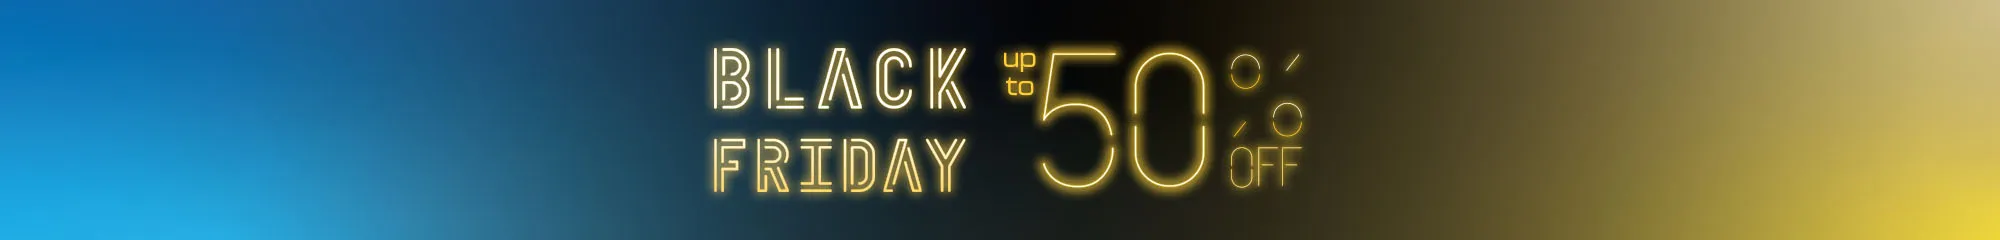 Black Friday Deal Up To 50% Off